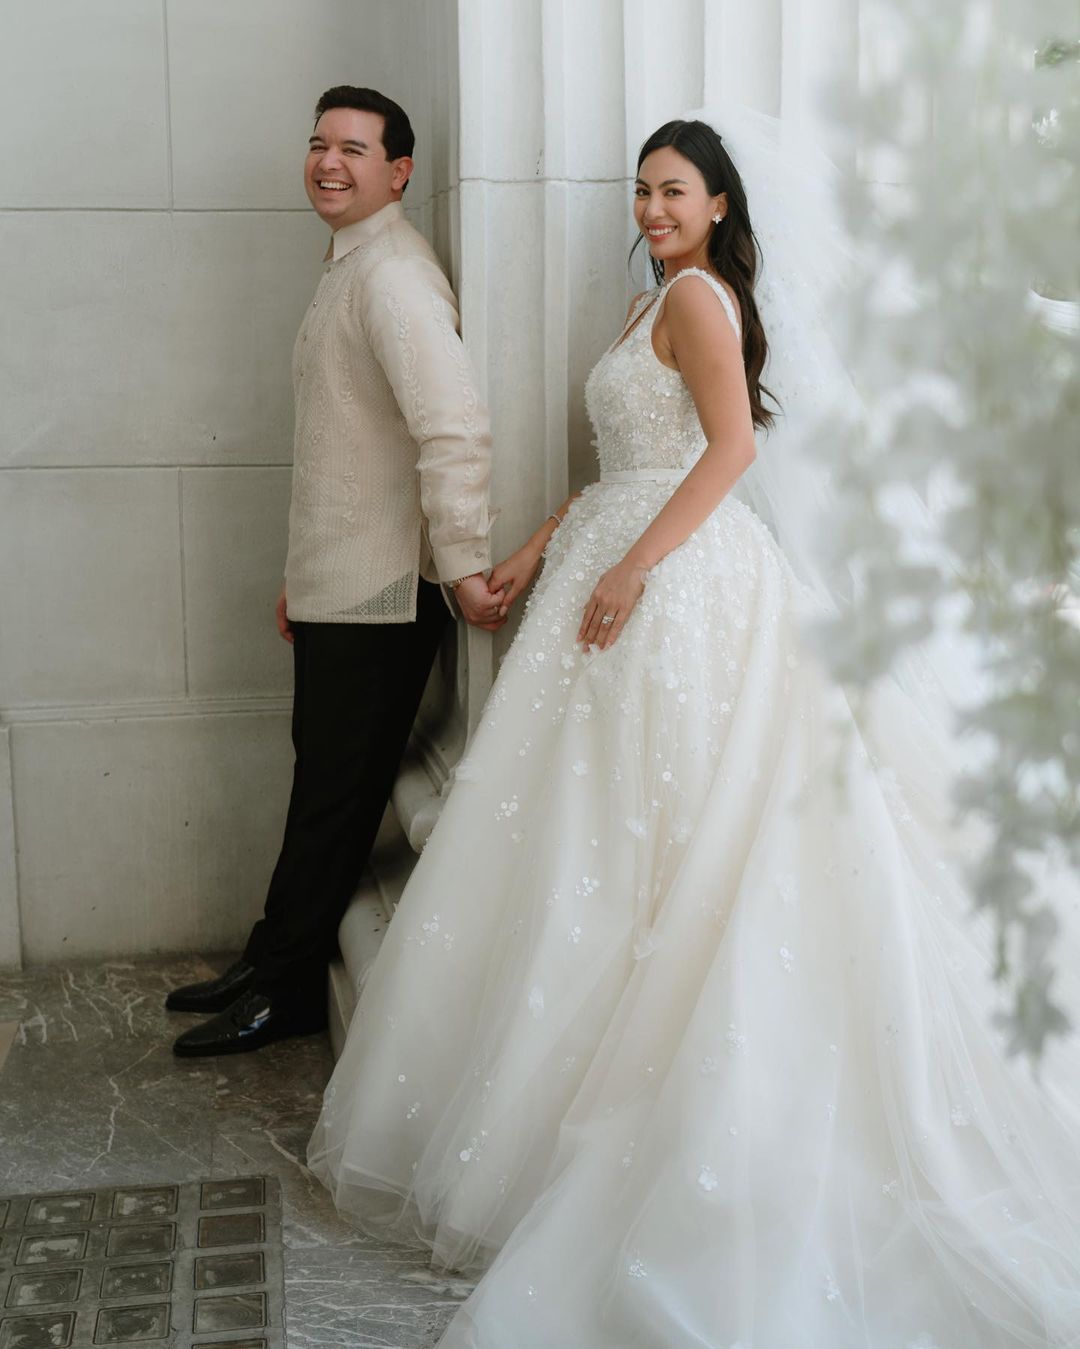 dominique cojuangco elie saab wedding gown